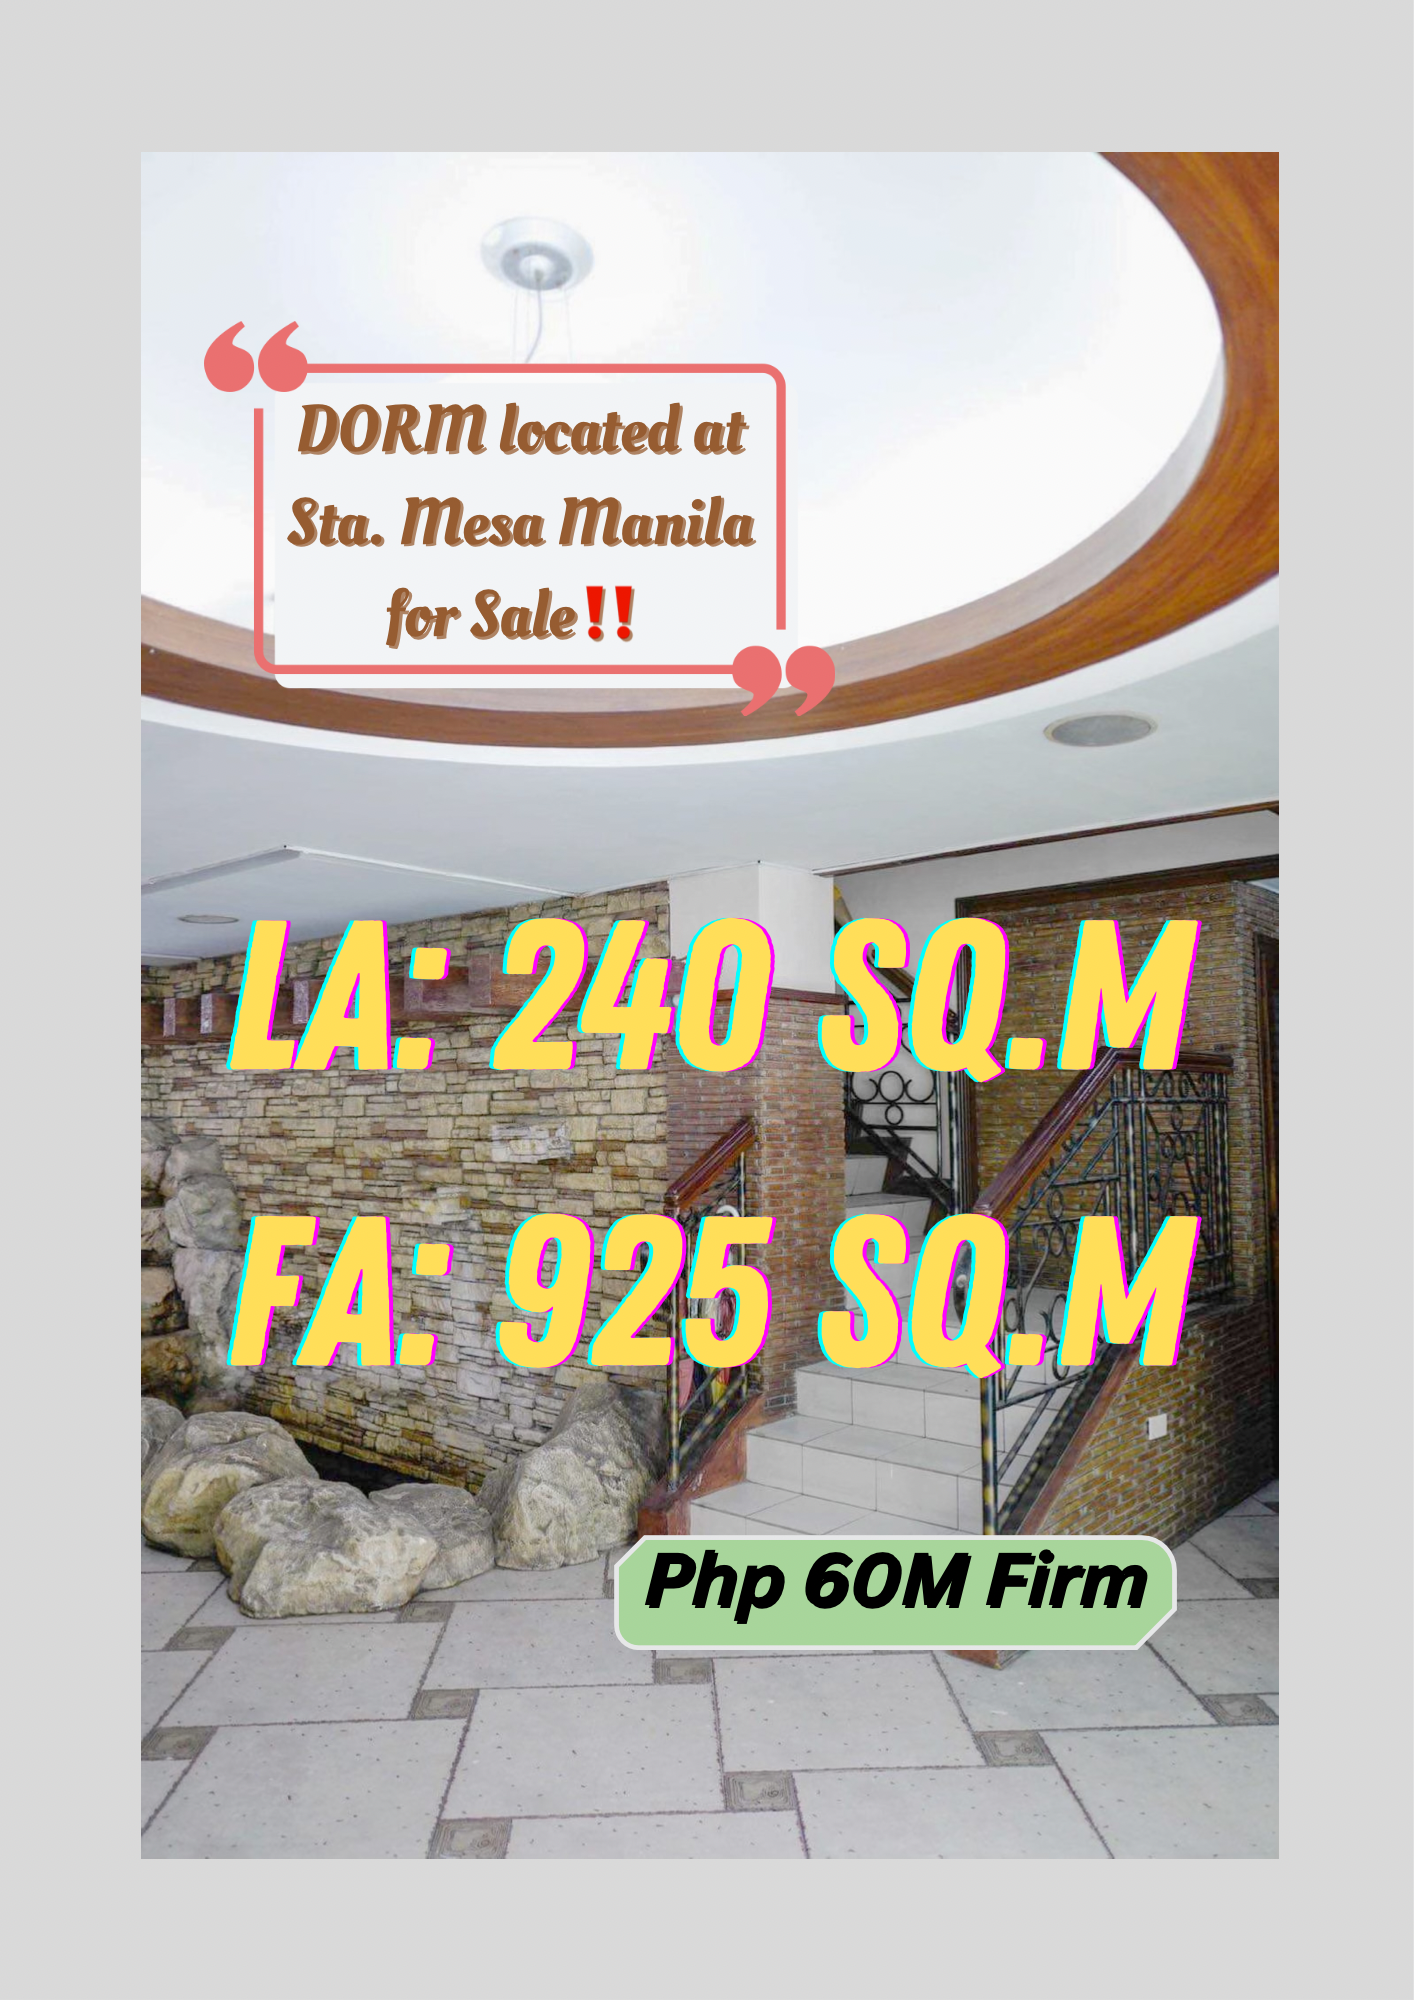 DORM located at Sta. Mesa Manila for Sale with 925 sq.m‼️